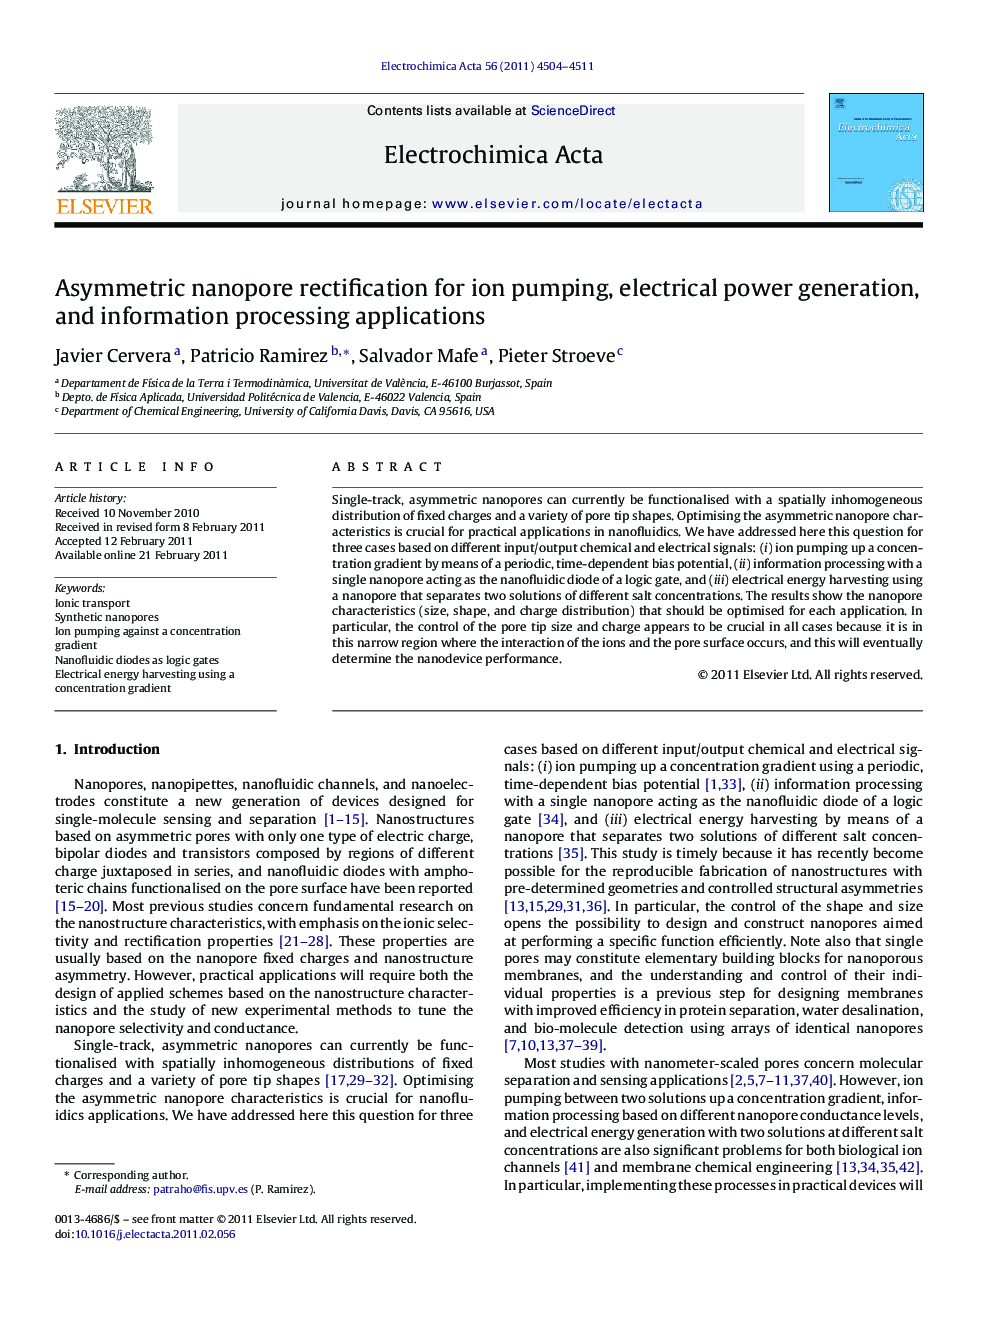 Asymmetric nanopore rectification for ion pumping, electrical power generation, and information processing applications